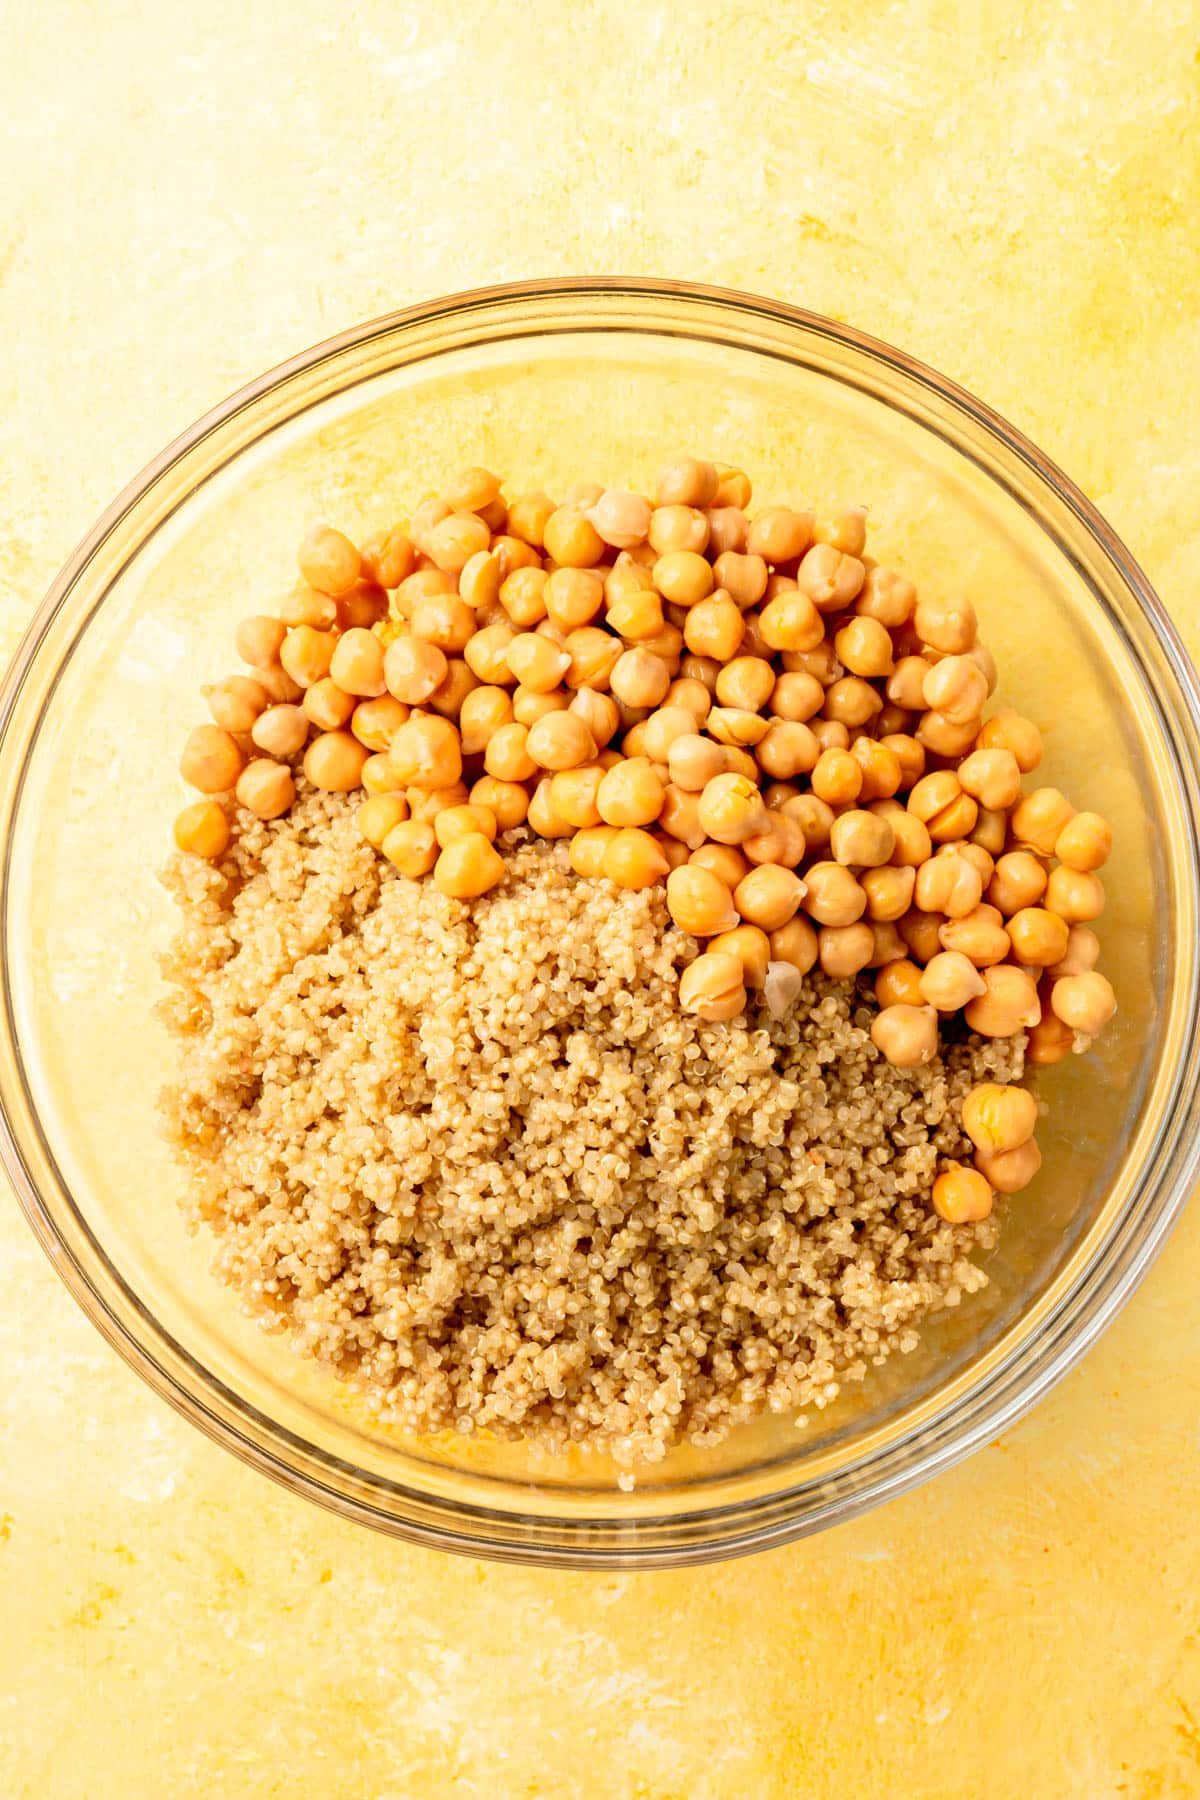 A glass mixing bowl with canned chickpeas and cooked quinoa in it before mixing together.